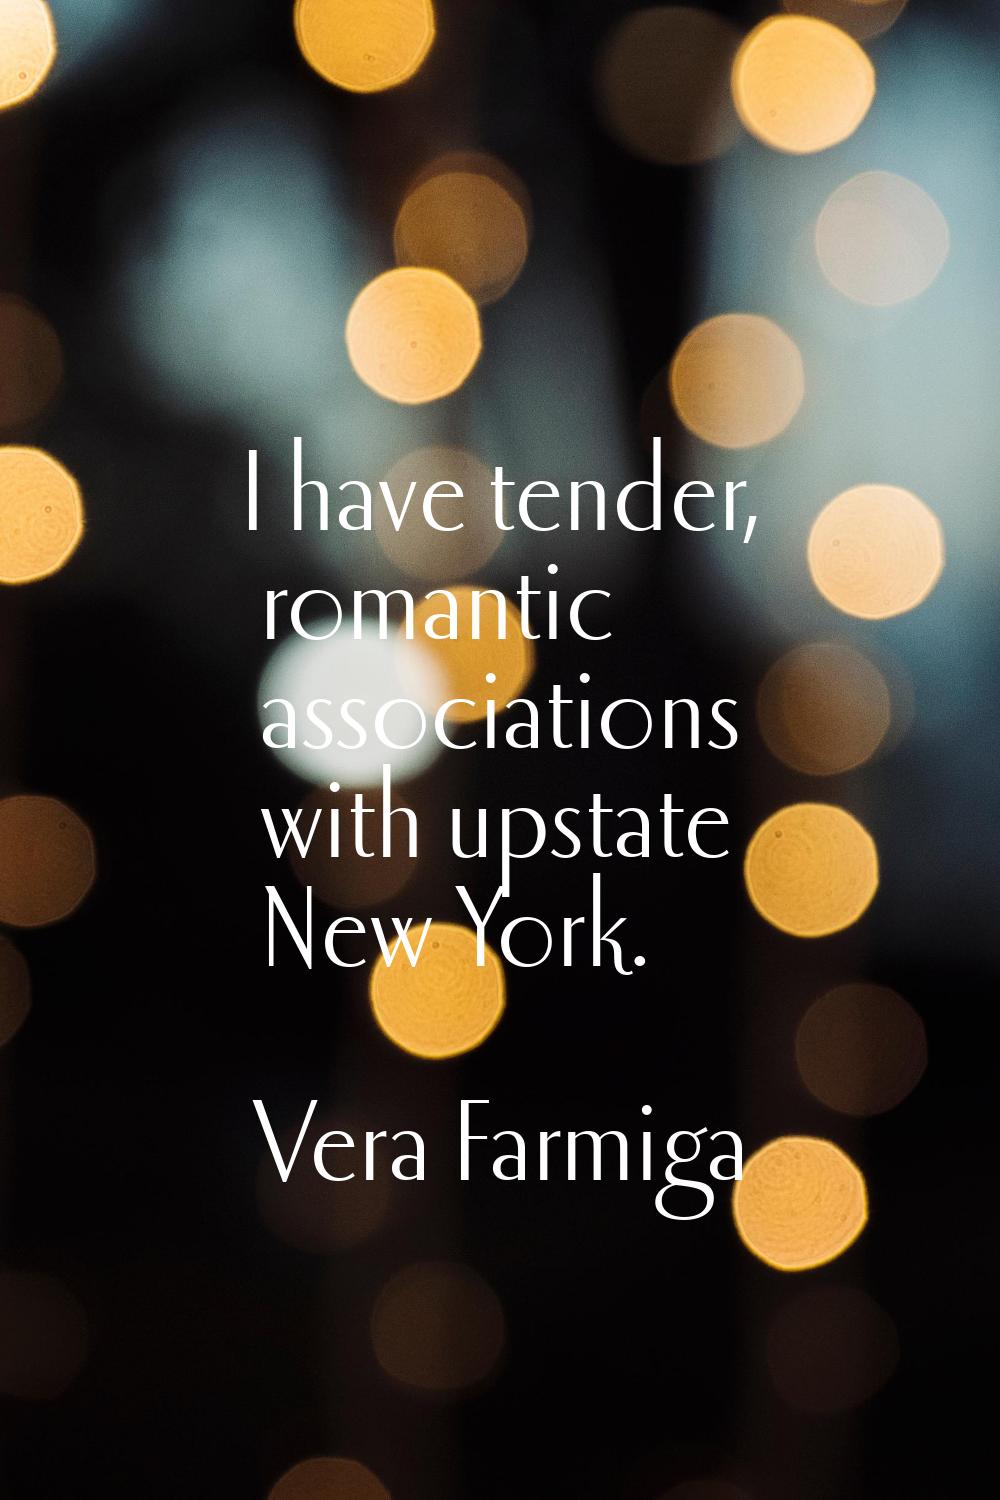 I have tender, romantic associations with upstate New York.